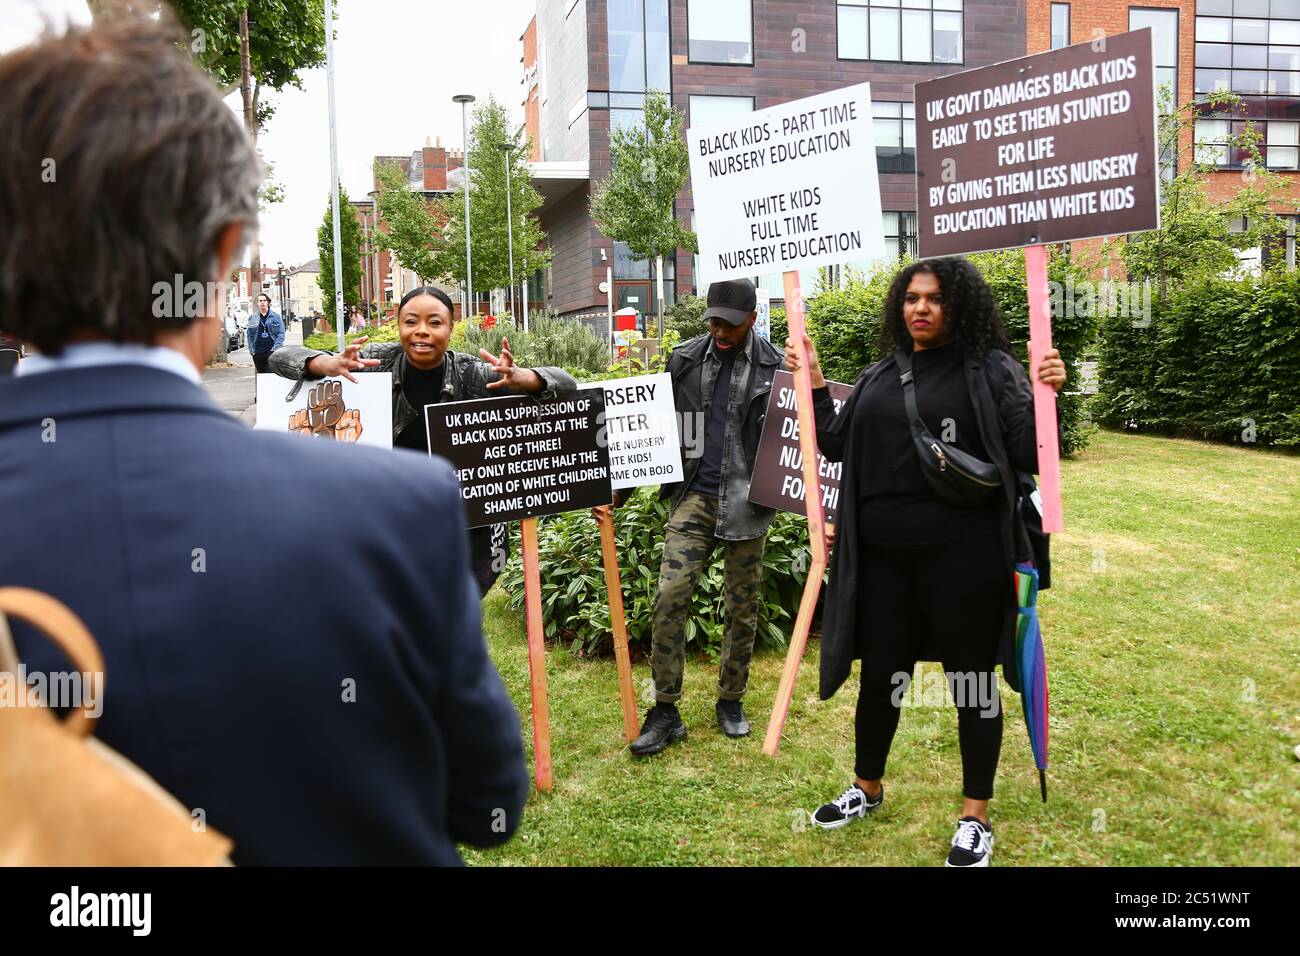 Dudley, West Midlands, UK. 30th June, 2020. As the Prime Minister Boris Johnson gave a speech in Dudley, a handful of protesters outside the college he was speaking in held up placards demanding full time nursery places for black children. Credit: Peter Lopeman/Alamy Live News Stock Photo